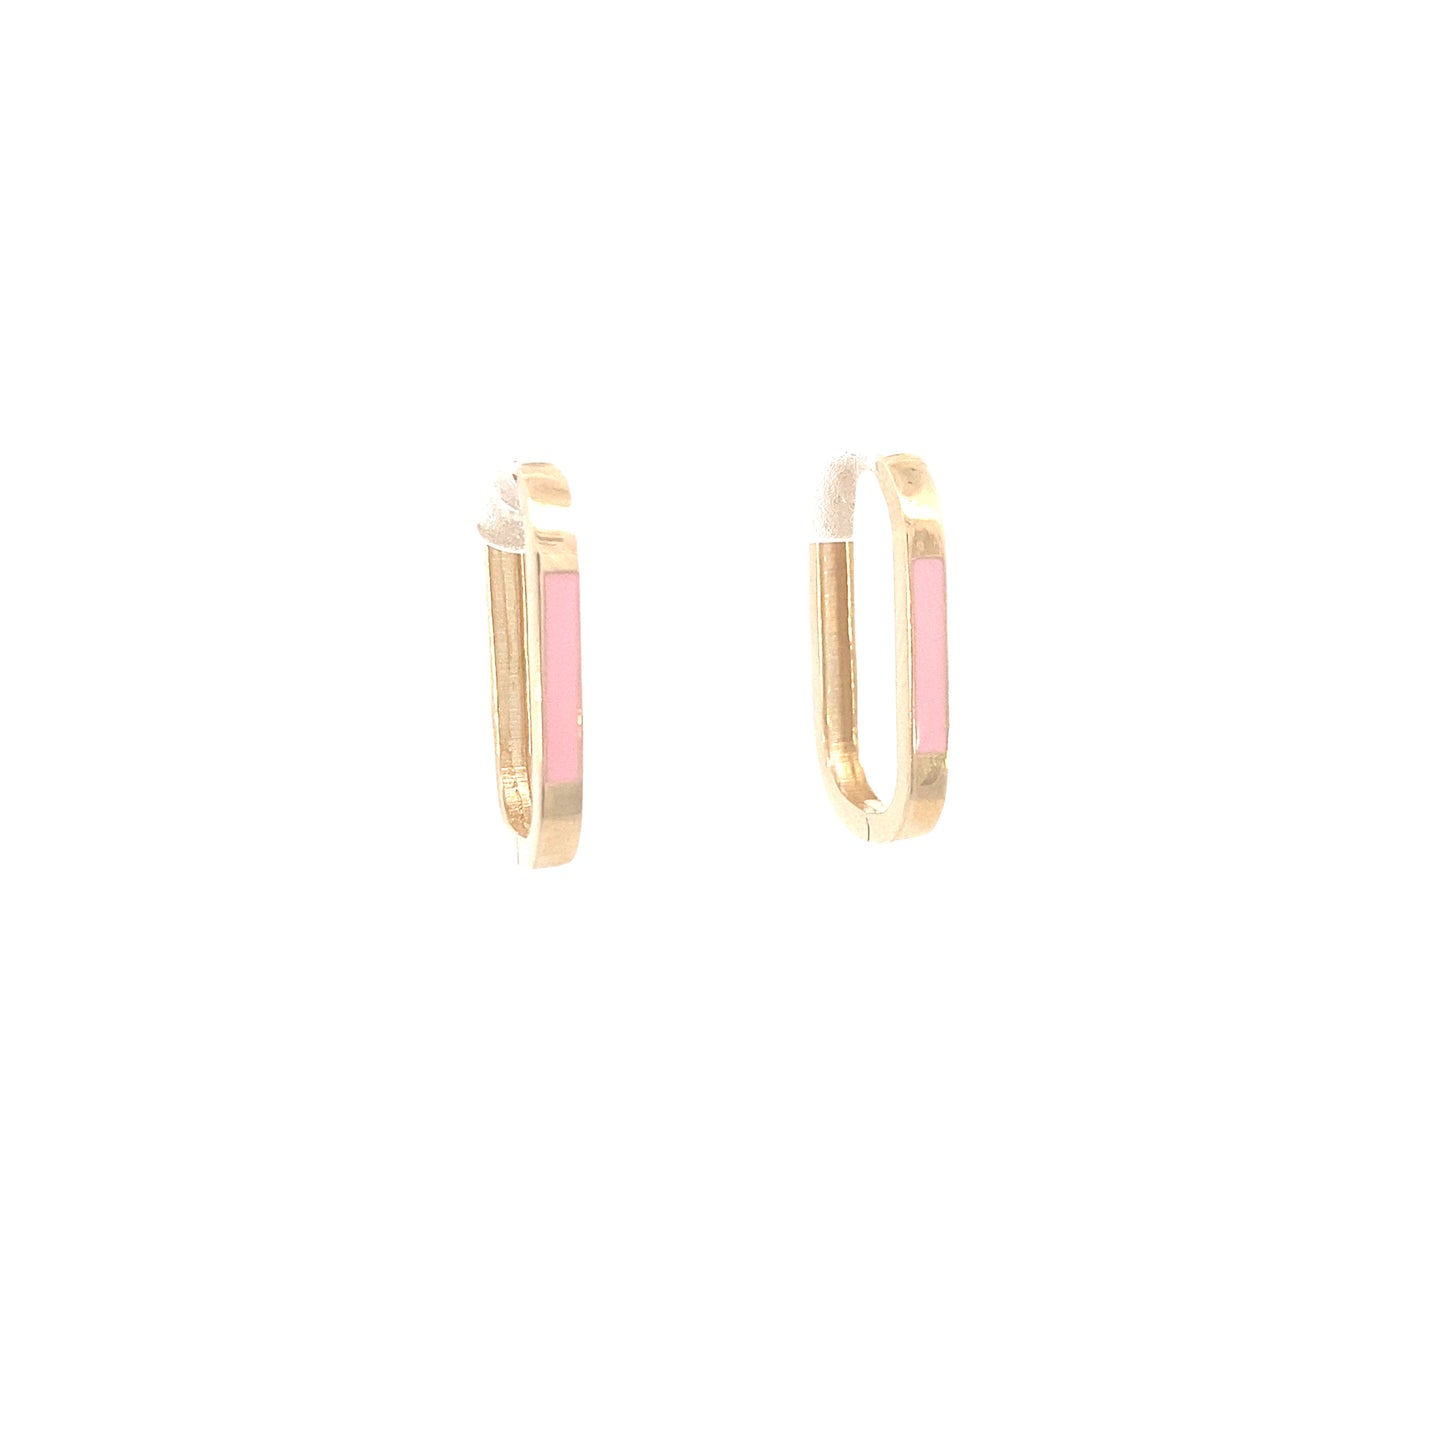 14K Gold Link Earrings with Pink Enamel | Luby Gold Collection | Luby 